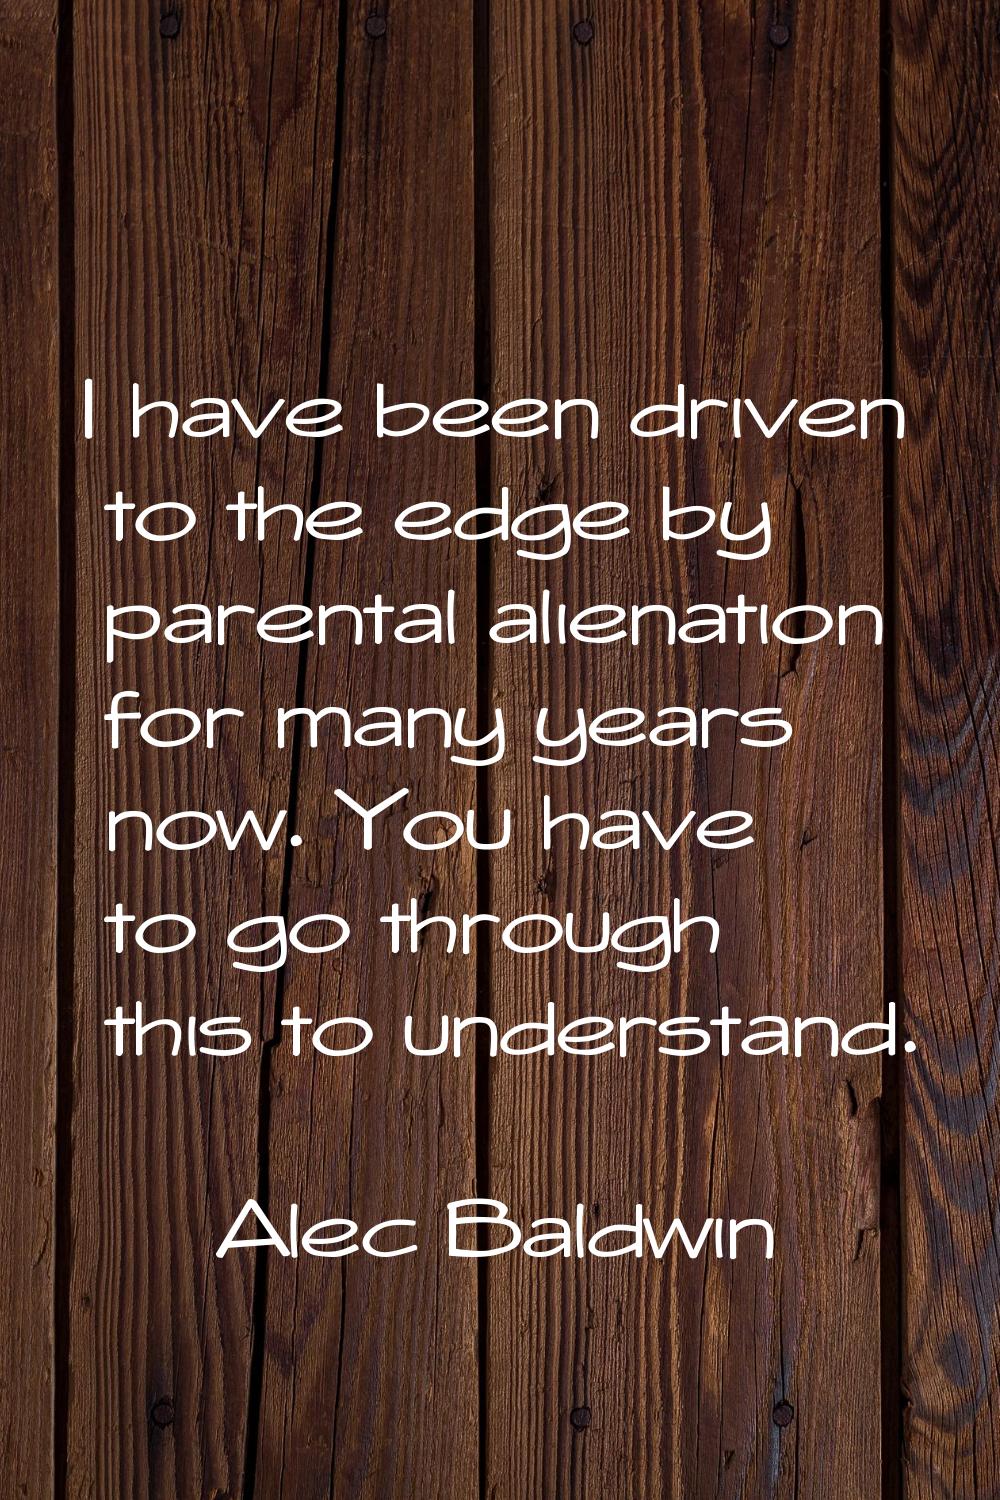 I have been driven to the edge by parental alienation for many years now. You have to go through th